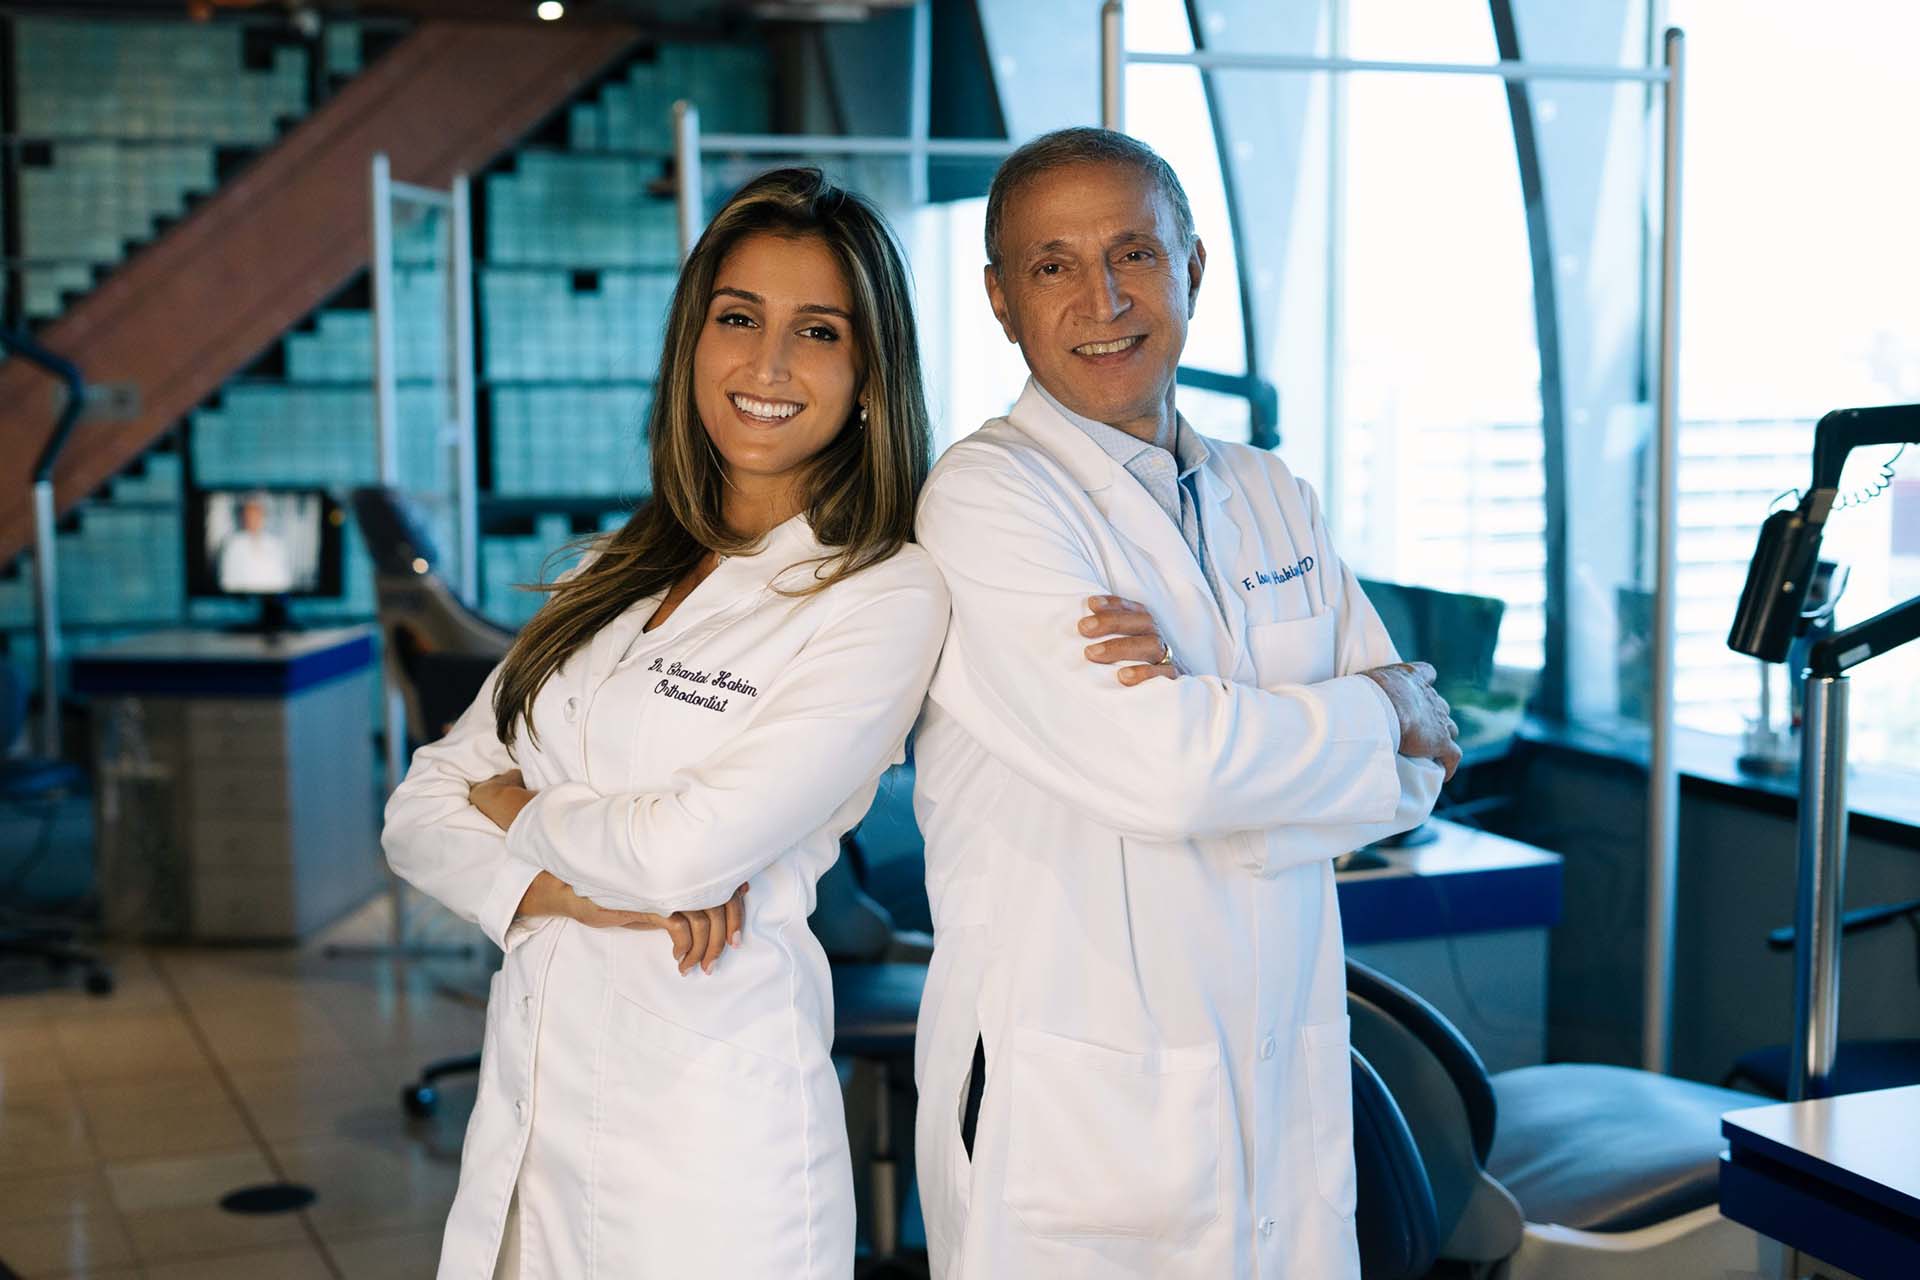 Dr. Chantal Hakim and Dr. F. Isaac Hakim at the Orthospaceship in Los Angeles, a Southern California orthodontic practice serving Culver City.